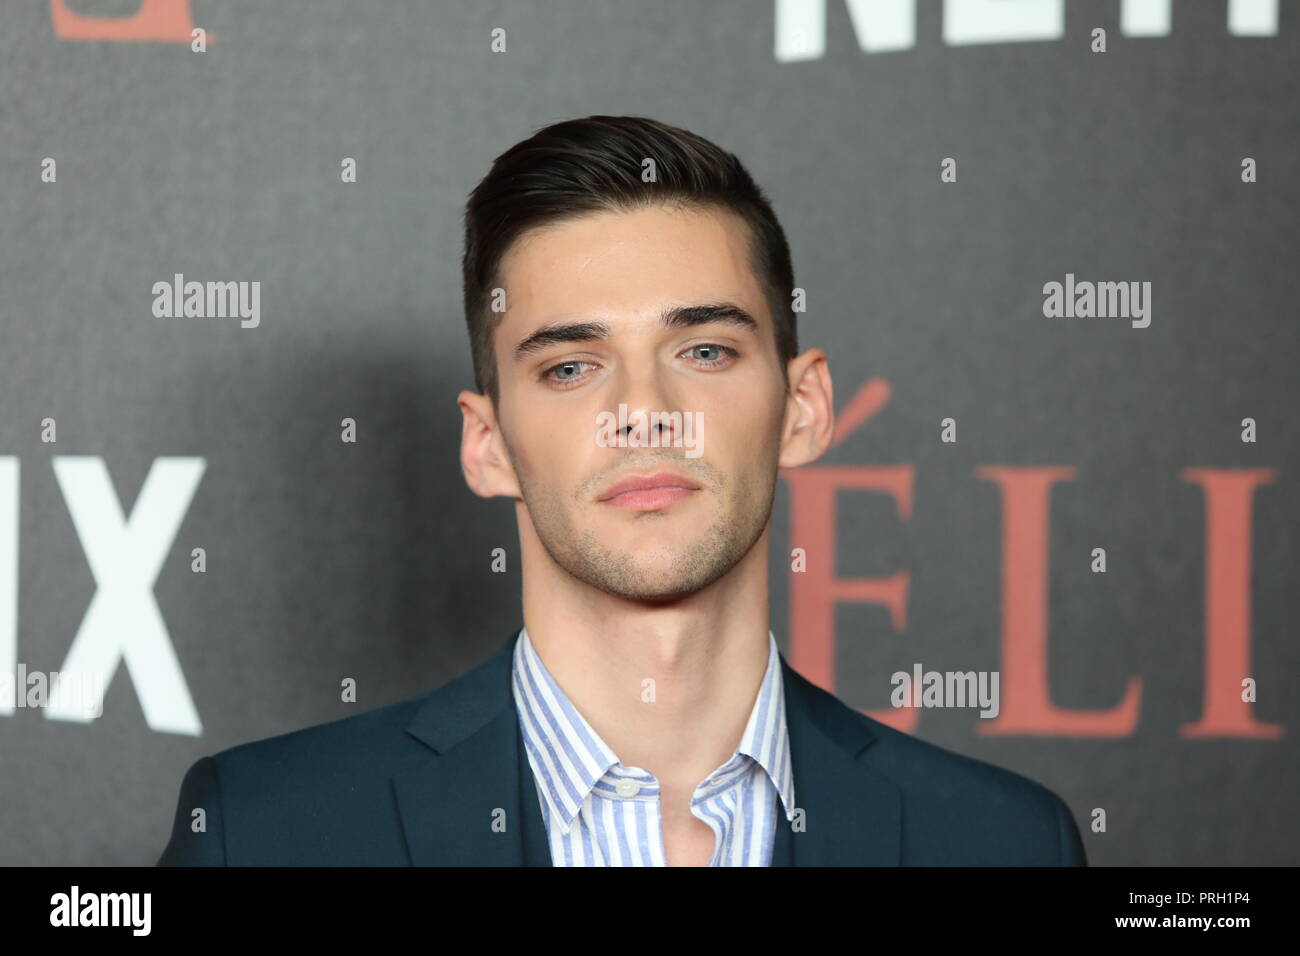 Madrid, Spain. 2nd Oct 2018. Actor ALVARO RICO attends 'Elite' premiere at Reina Sofia Museum. Premiere of the ƒlite series, which premieres Netflix -it is its second Spanish original series- this Friday, October 5, was directed by Ram—n Salazar and Dani de la Orden on Oct 2, 2018 in Madrid, Spain Credit: Jesús Hellin/Alamy Live News Stock Photo